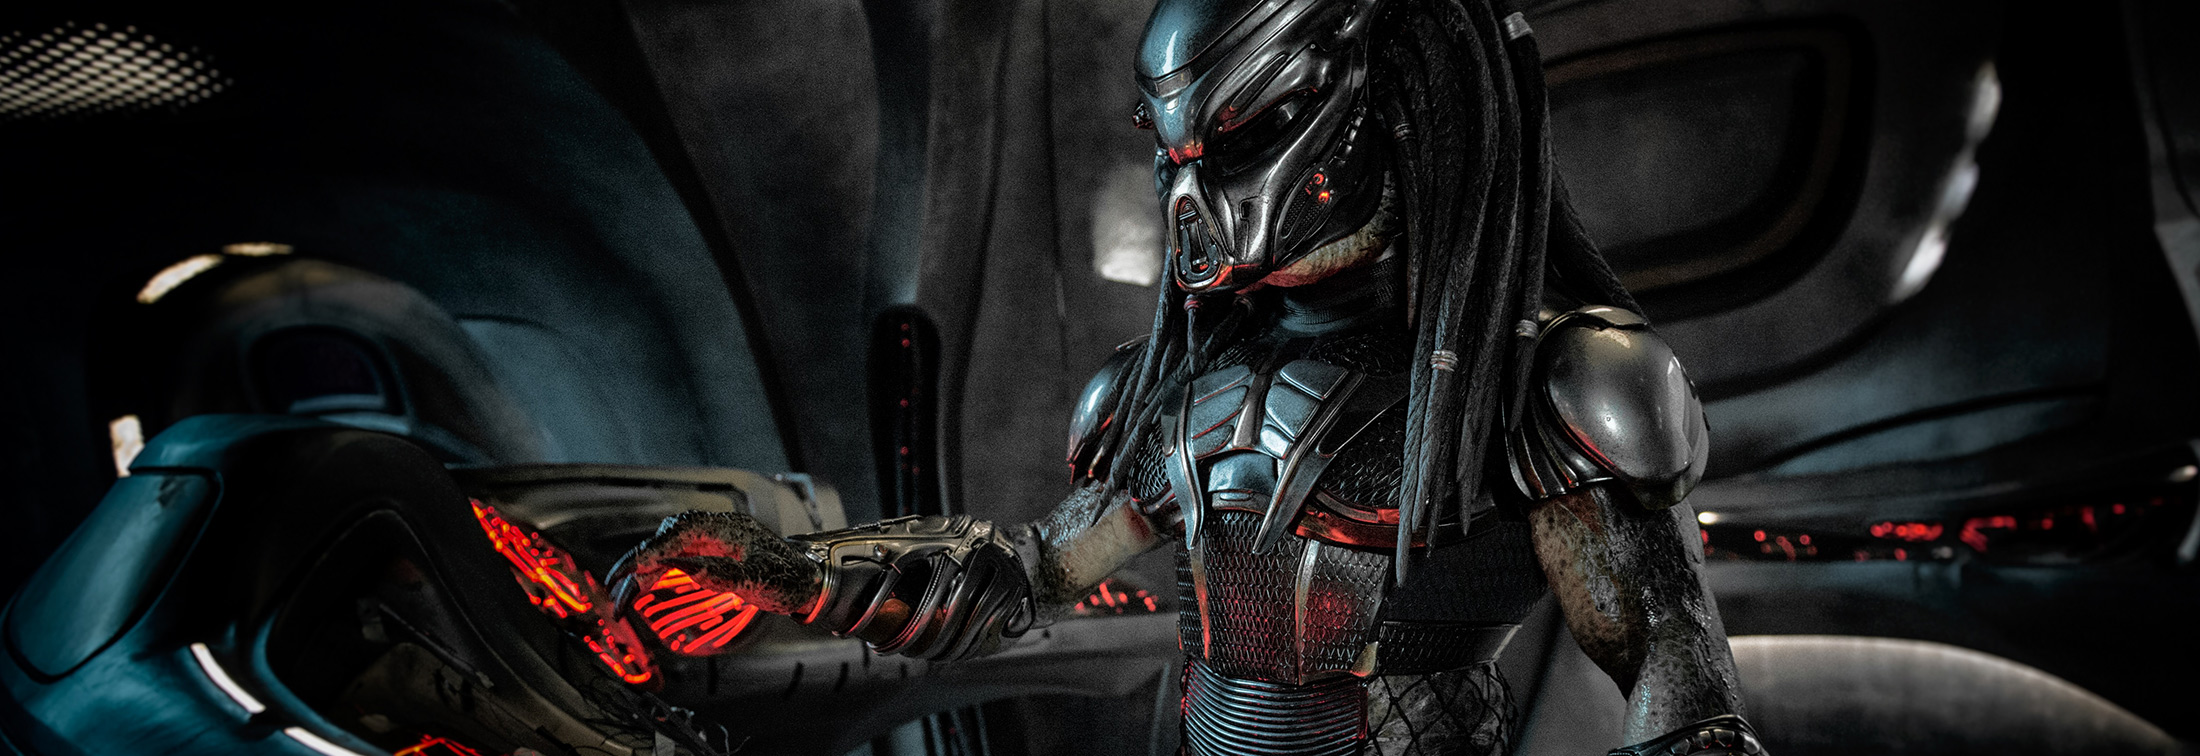 The Predator - Another kick-ass franchise bites the dust